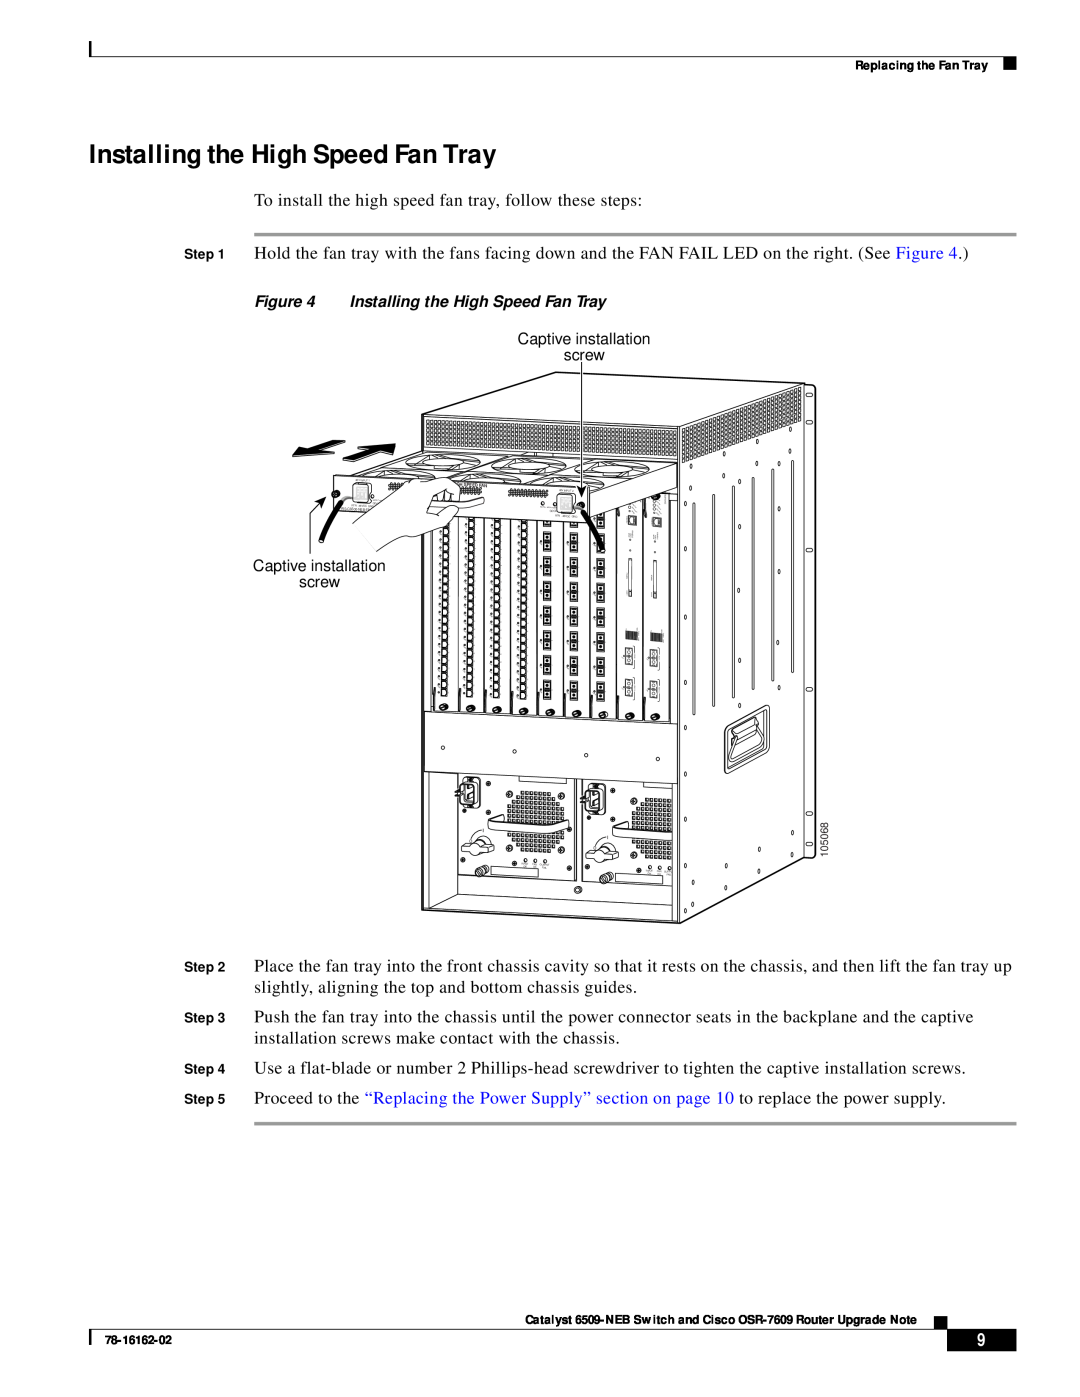 Cisco Systems OSR-7609, 6509-NEB manual Installing the High Speed Fan Tray 